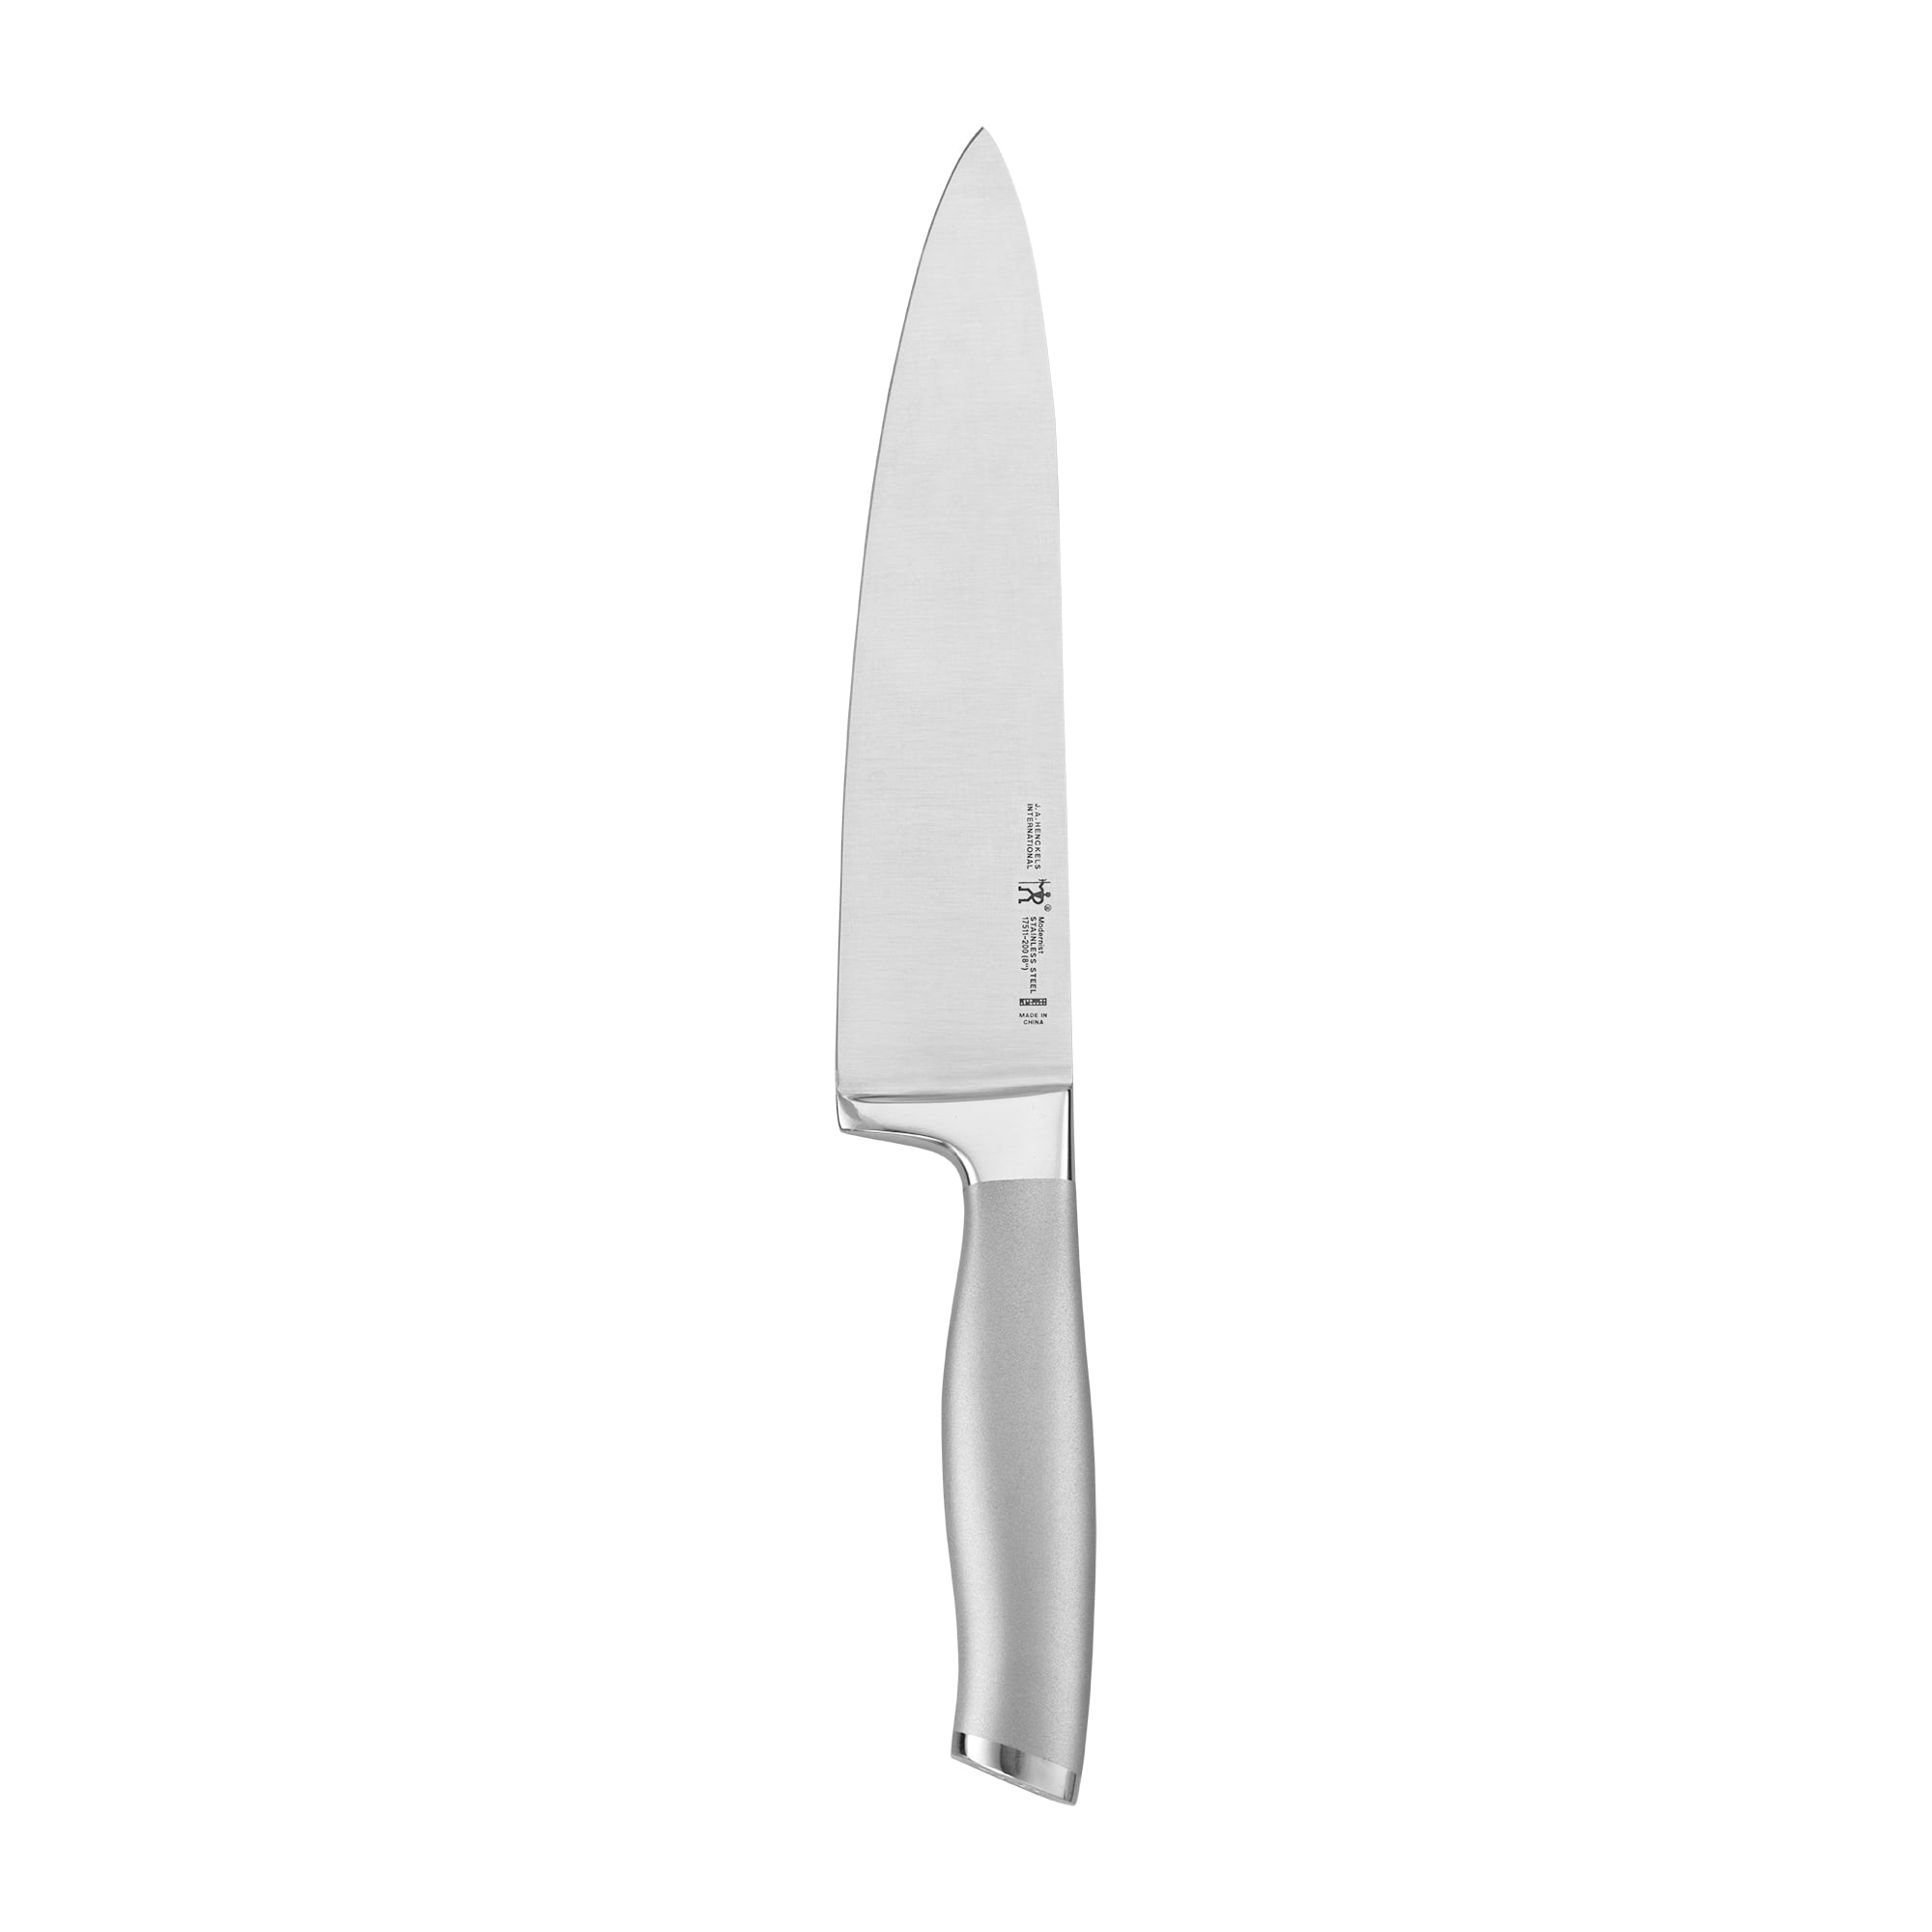 J.A. Henckels Classic Chef Knife Review - SteelBlue Kitchen